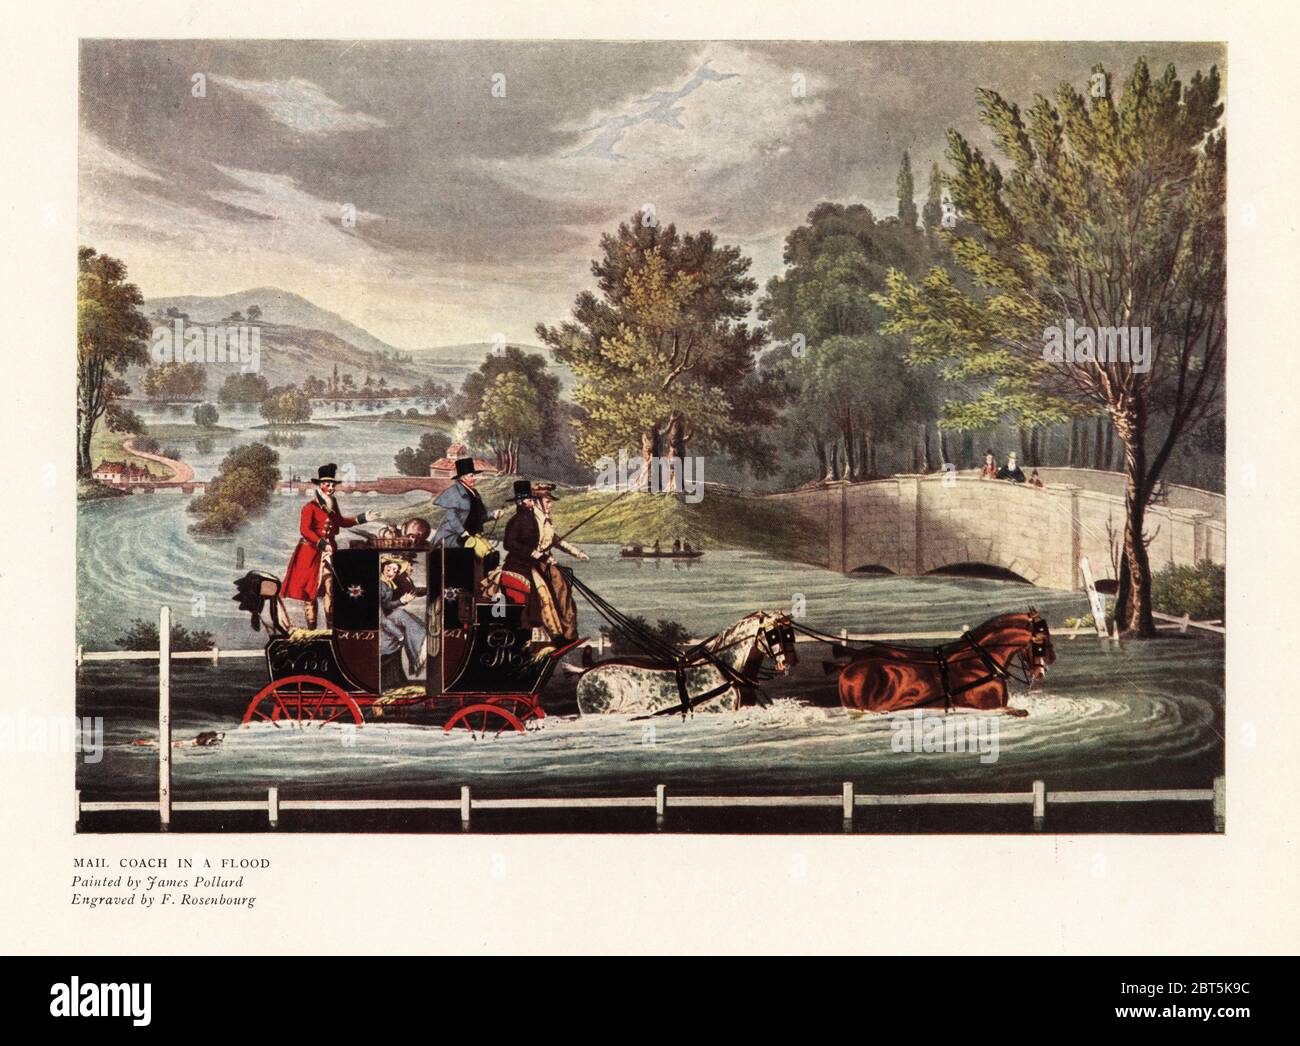 Mail coach in a flood. Royal mail four-horse coach with liveried guard driving through a flooded riverside road, 1820s. Color print after an engraving by F. Rosenbourg from an illustration by James Pollard in Ralph Nevills Old Sporting Prints, The Connoisseur Magazine, London, 1908. Stock Photo